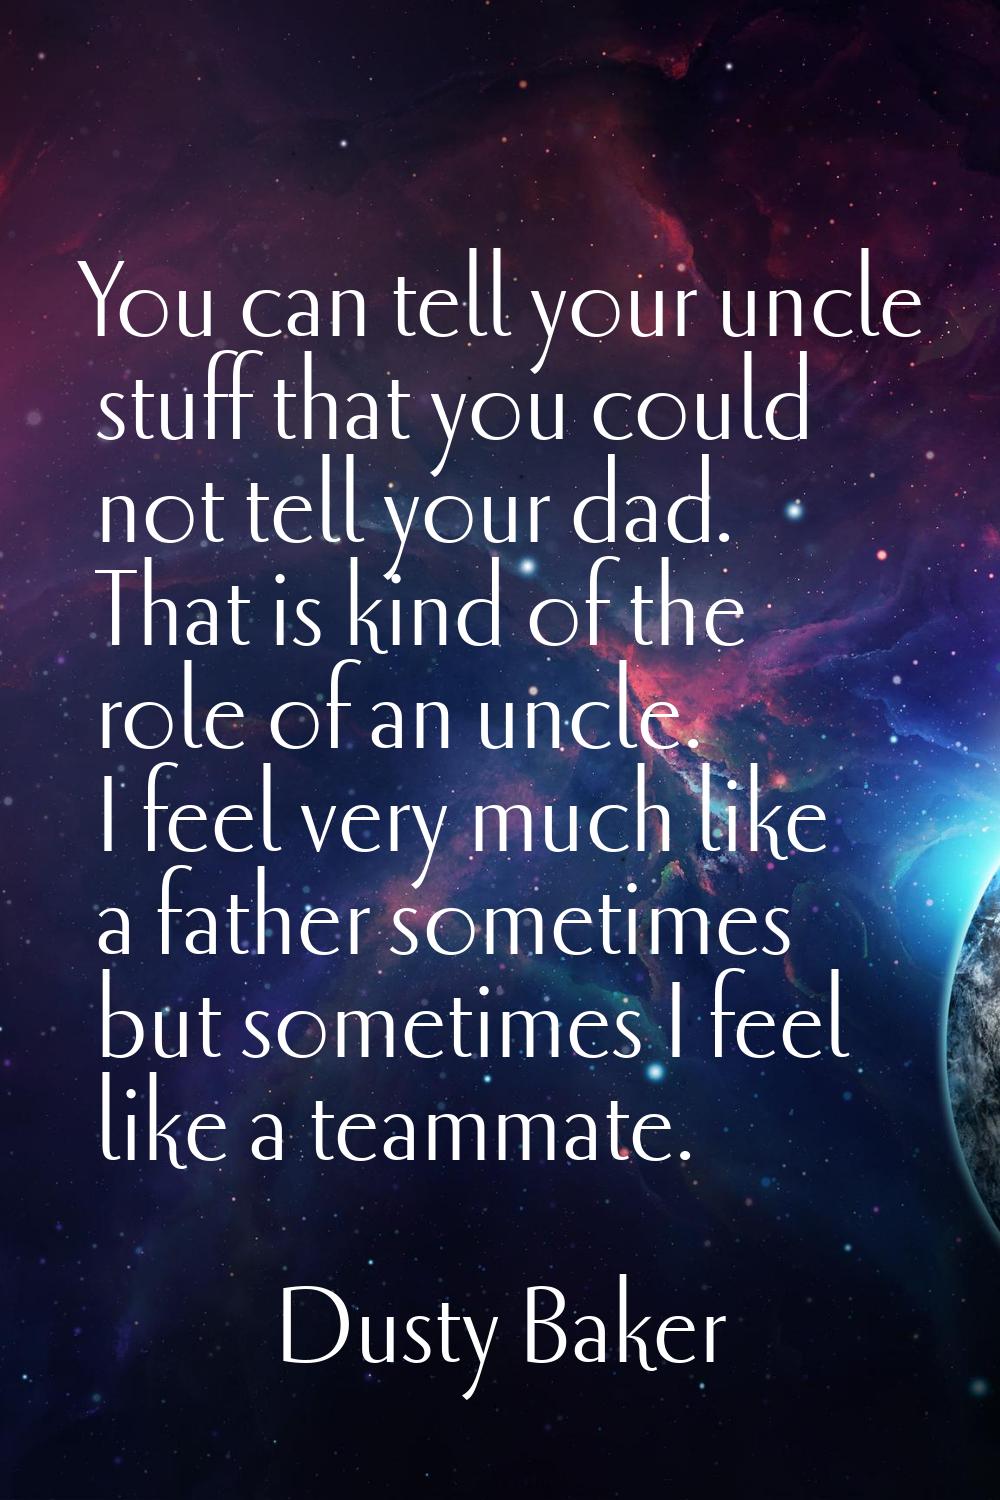 You can tell your uncle stuff that you could not tell your dad. That is kind of the role of an uncl